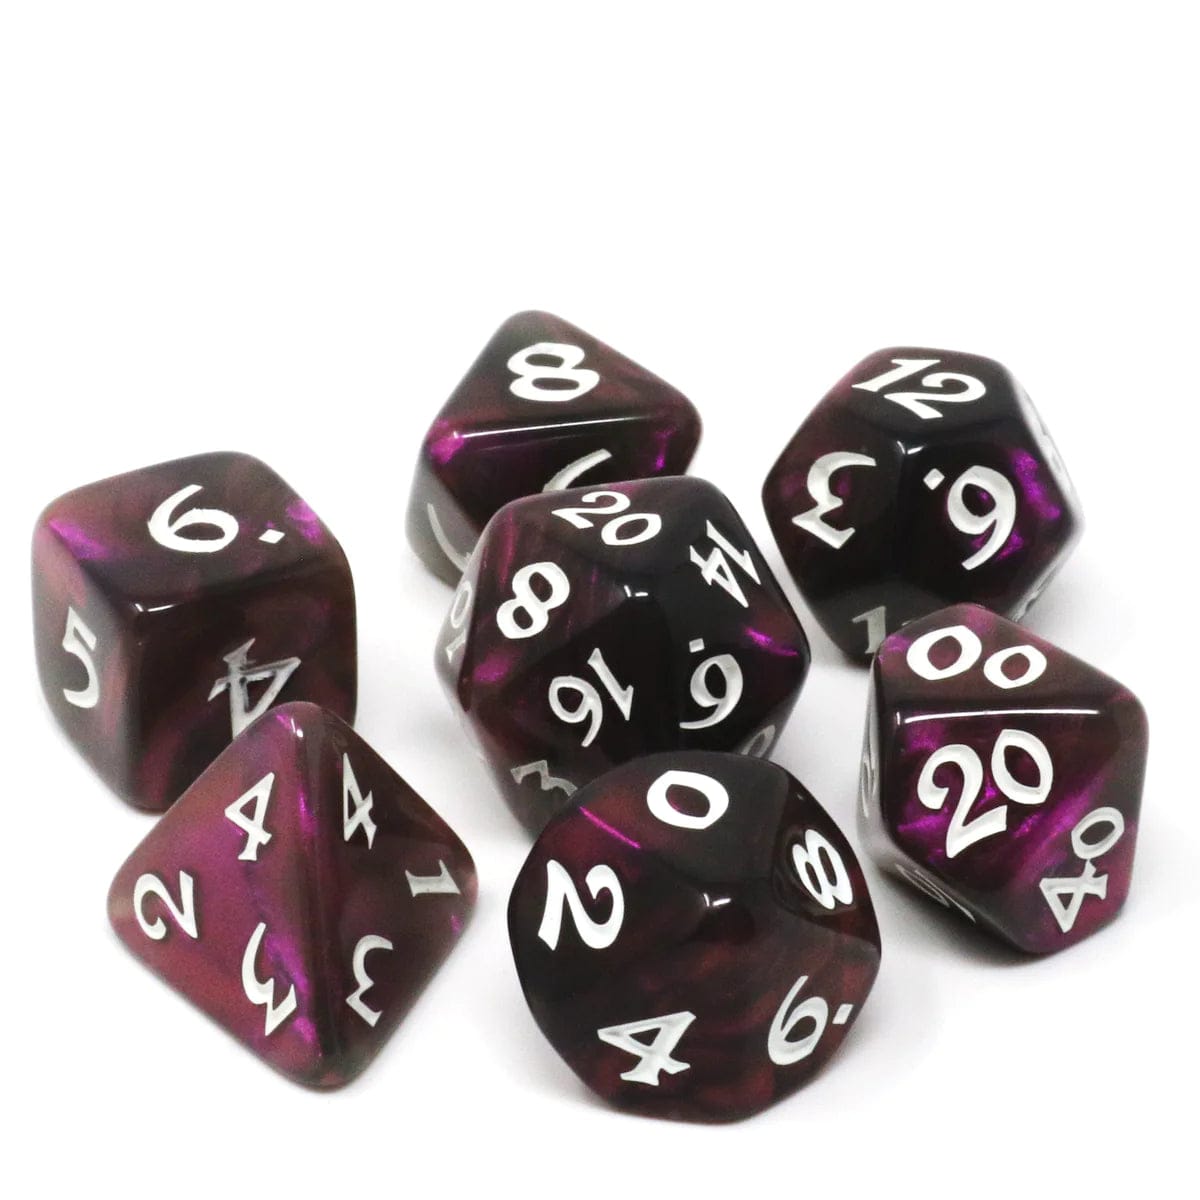 Die Hard Dice: 7pc RPG Set - Elessia Moonstone, Inkswell with White